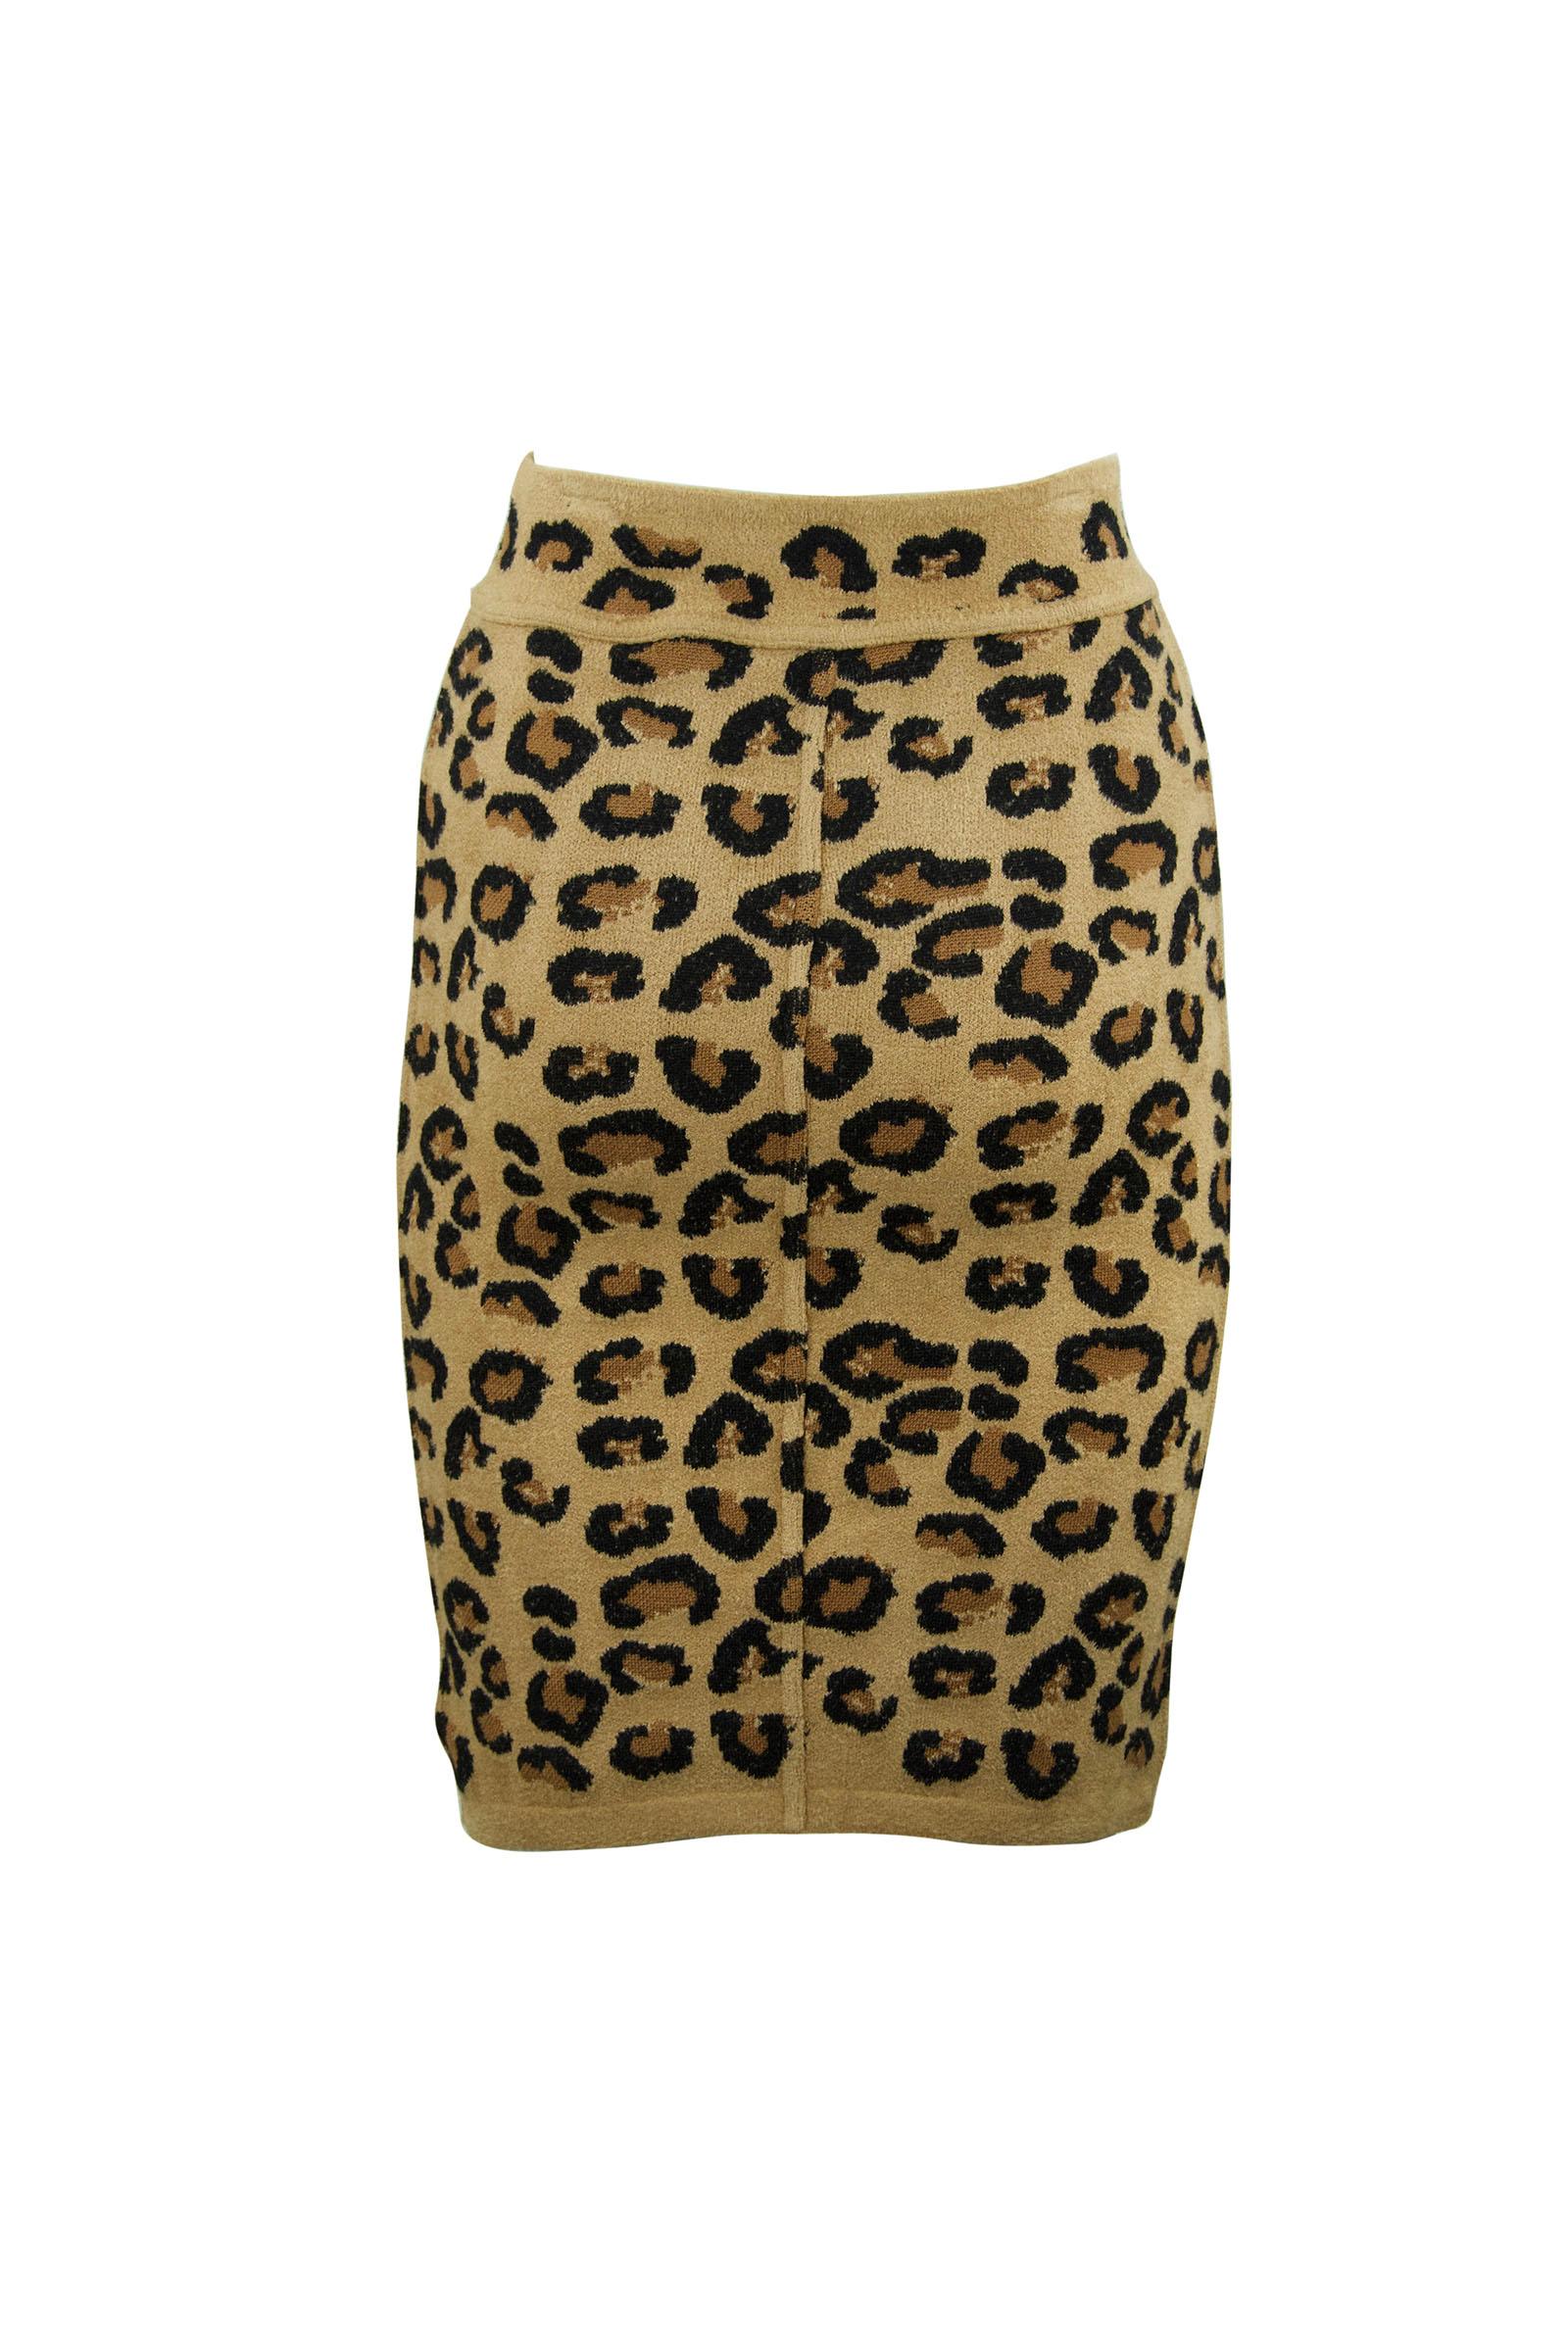 Incredibly rare and coveted 1990s vintage Alaia pencil skirt.  From one of his most famous collections, worn by top celebrities and supermodels.  Collectors- this is a rare piece, do not miss out on this opportunity.  Features a waist band and